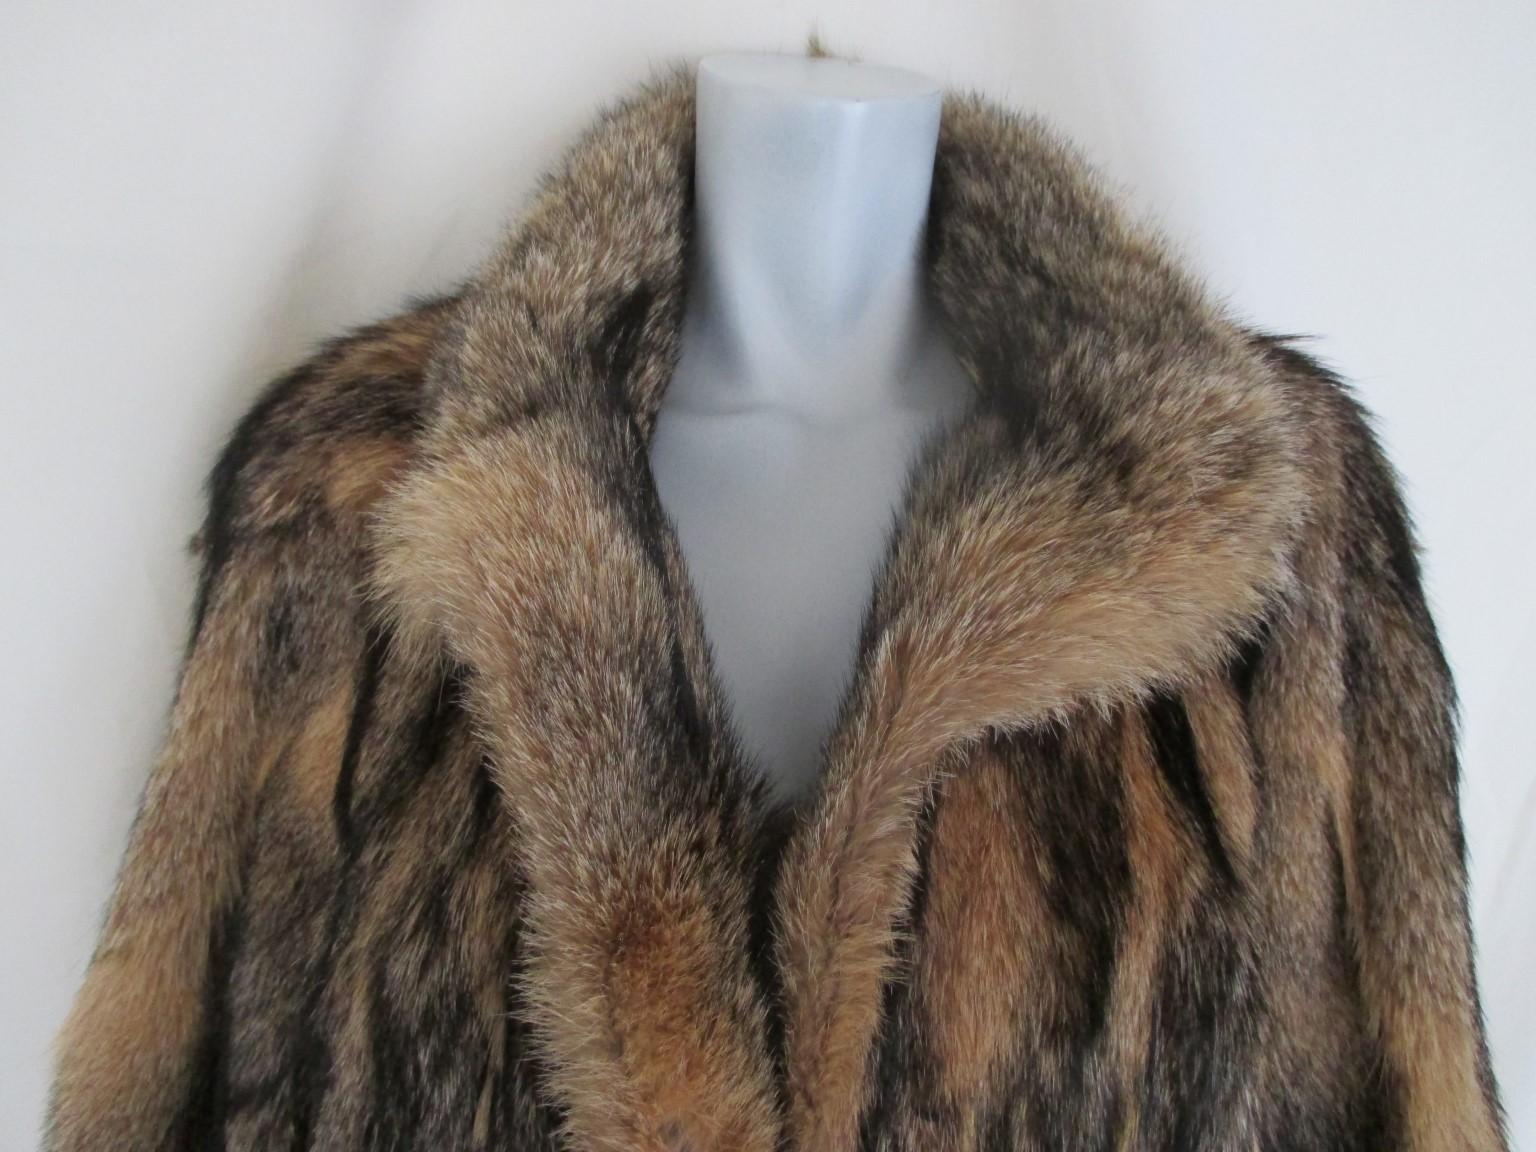 This long coat is made of coyote fur with 2 pockets, no closing hooks, there where former hooks.
The sleeves are wide and the quality of this fur is thick.
Its in very good vintage condition 
These coats are rare to find!
Can be worn by men and